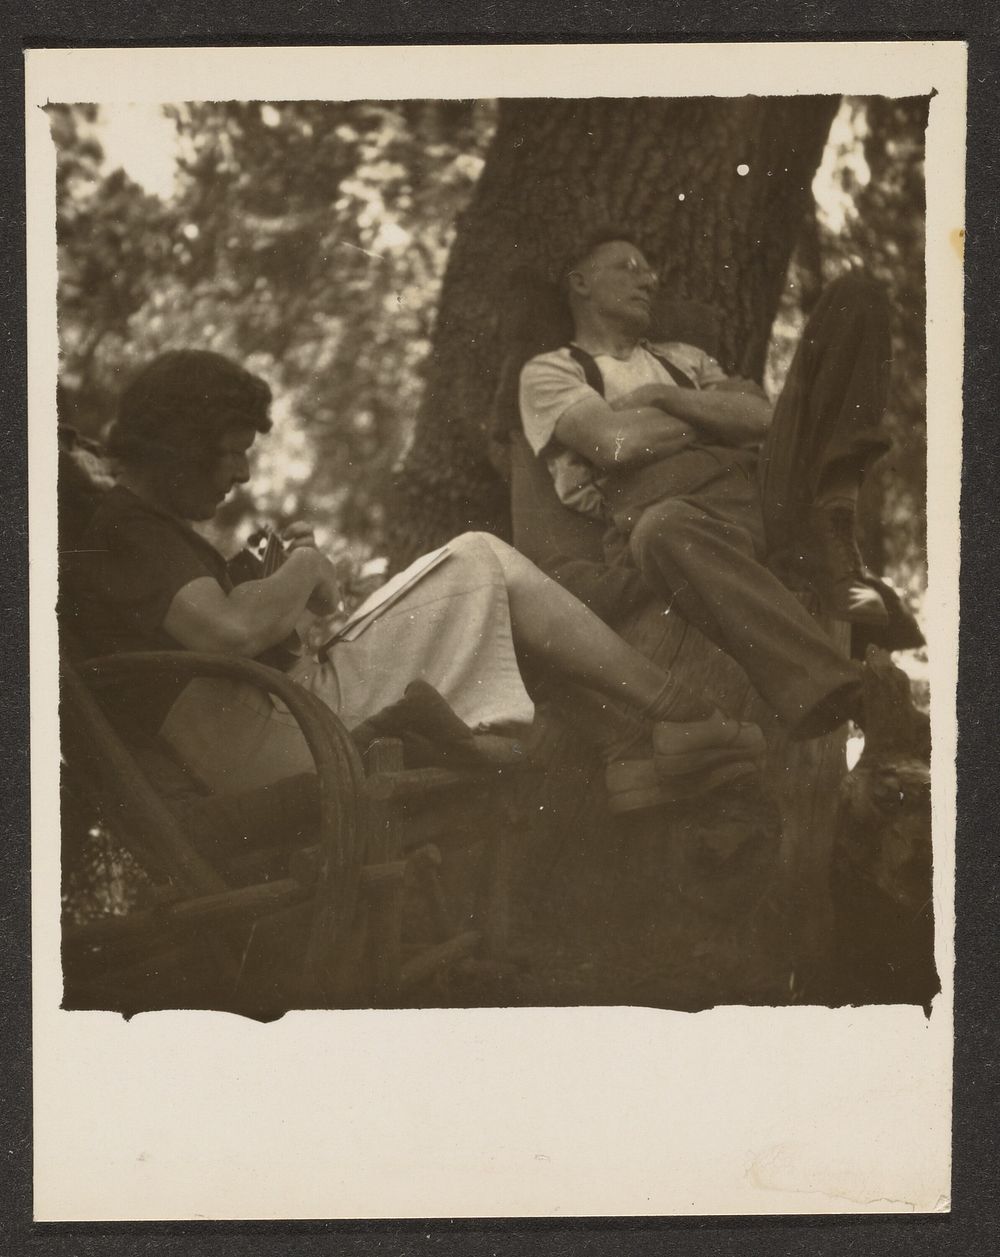 Florence and Husband in Woods by Louis Fleckenstein